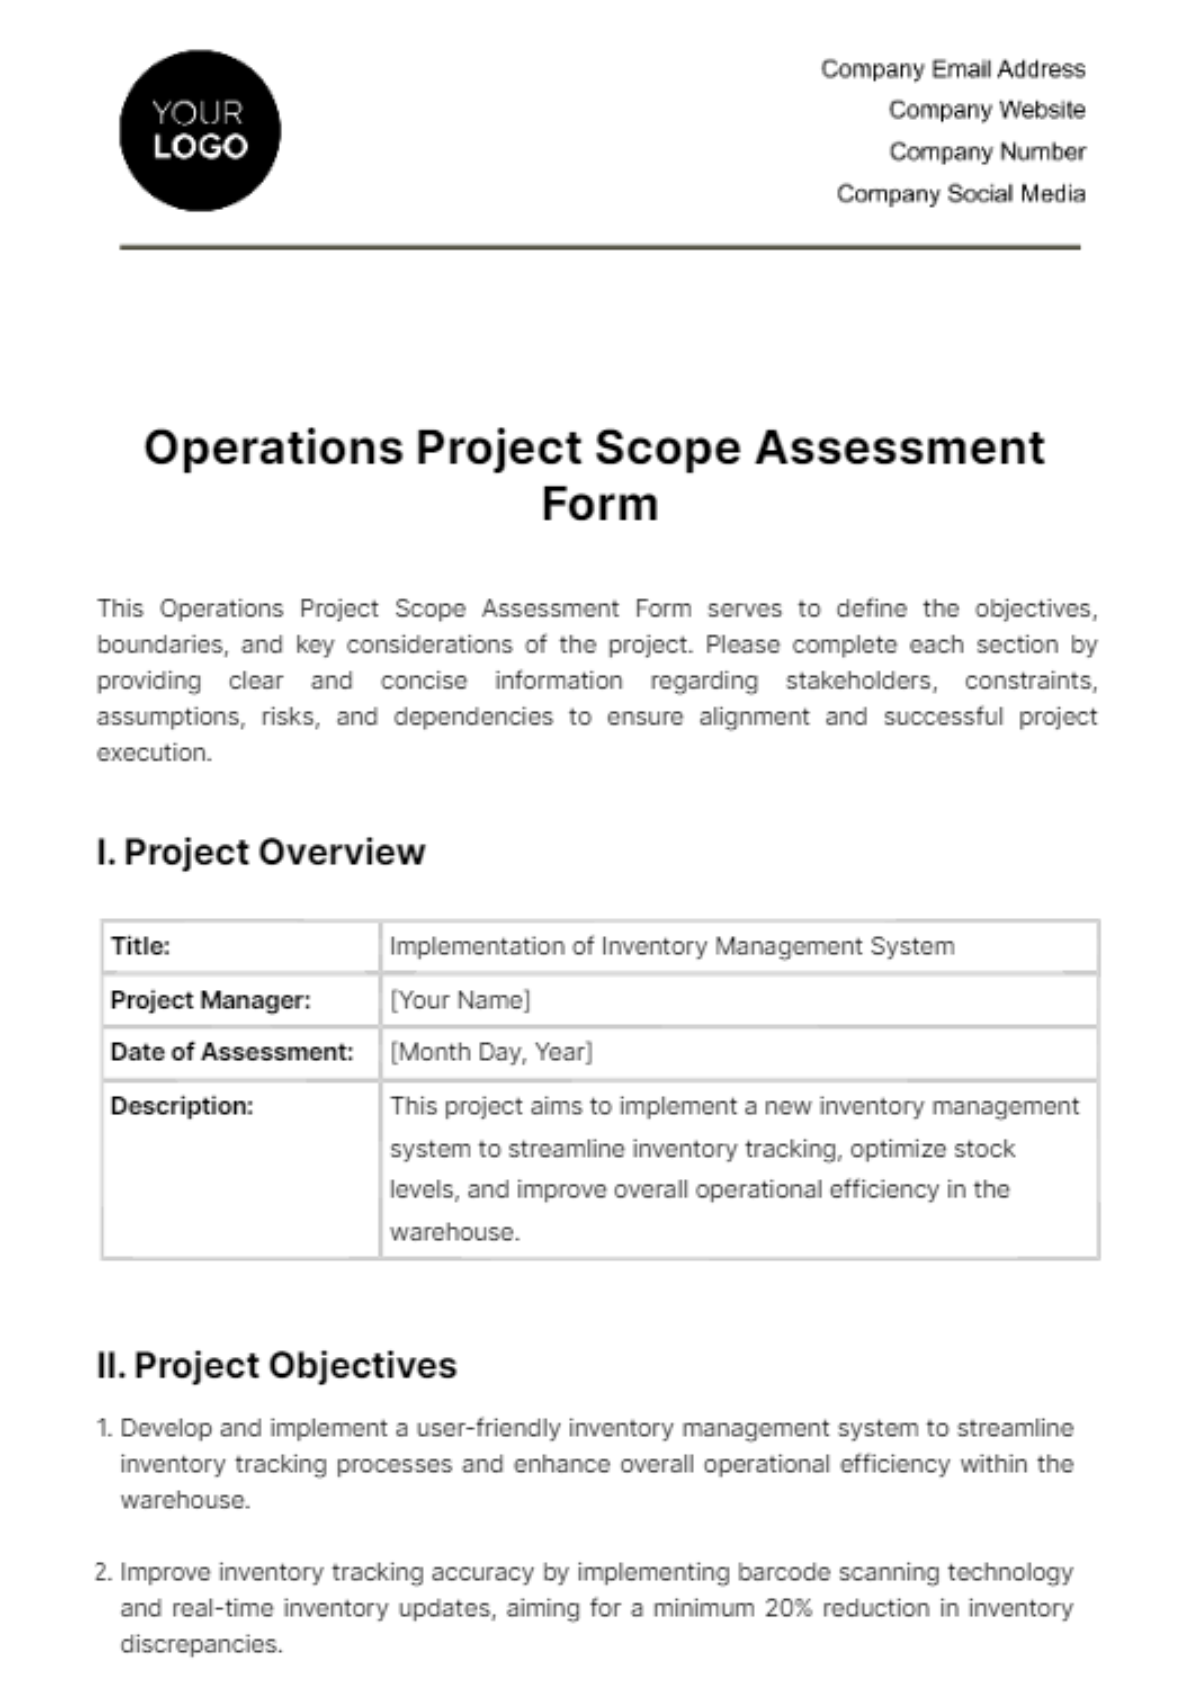 Operations Project Scope Assessment Form Template